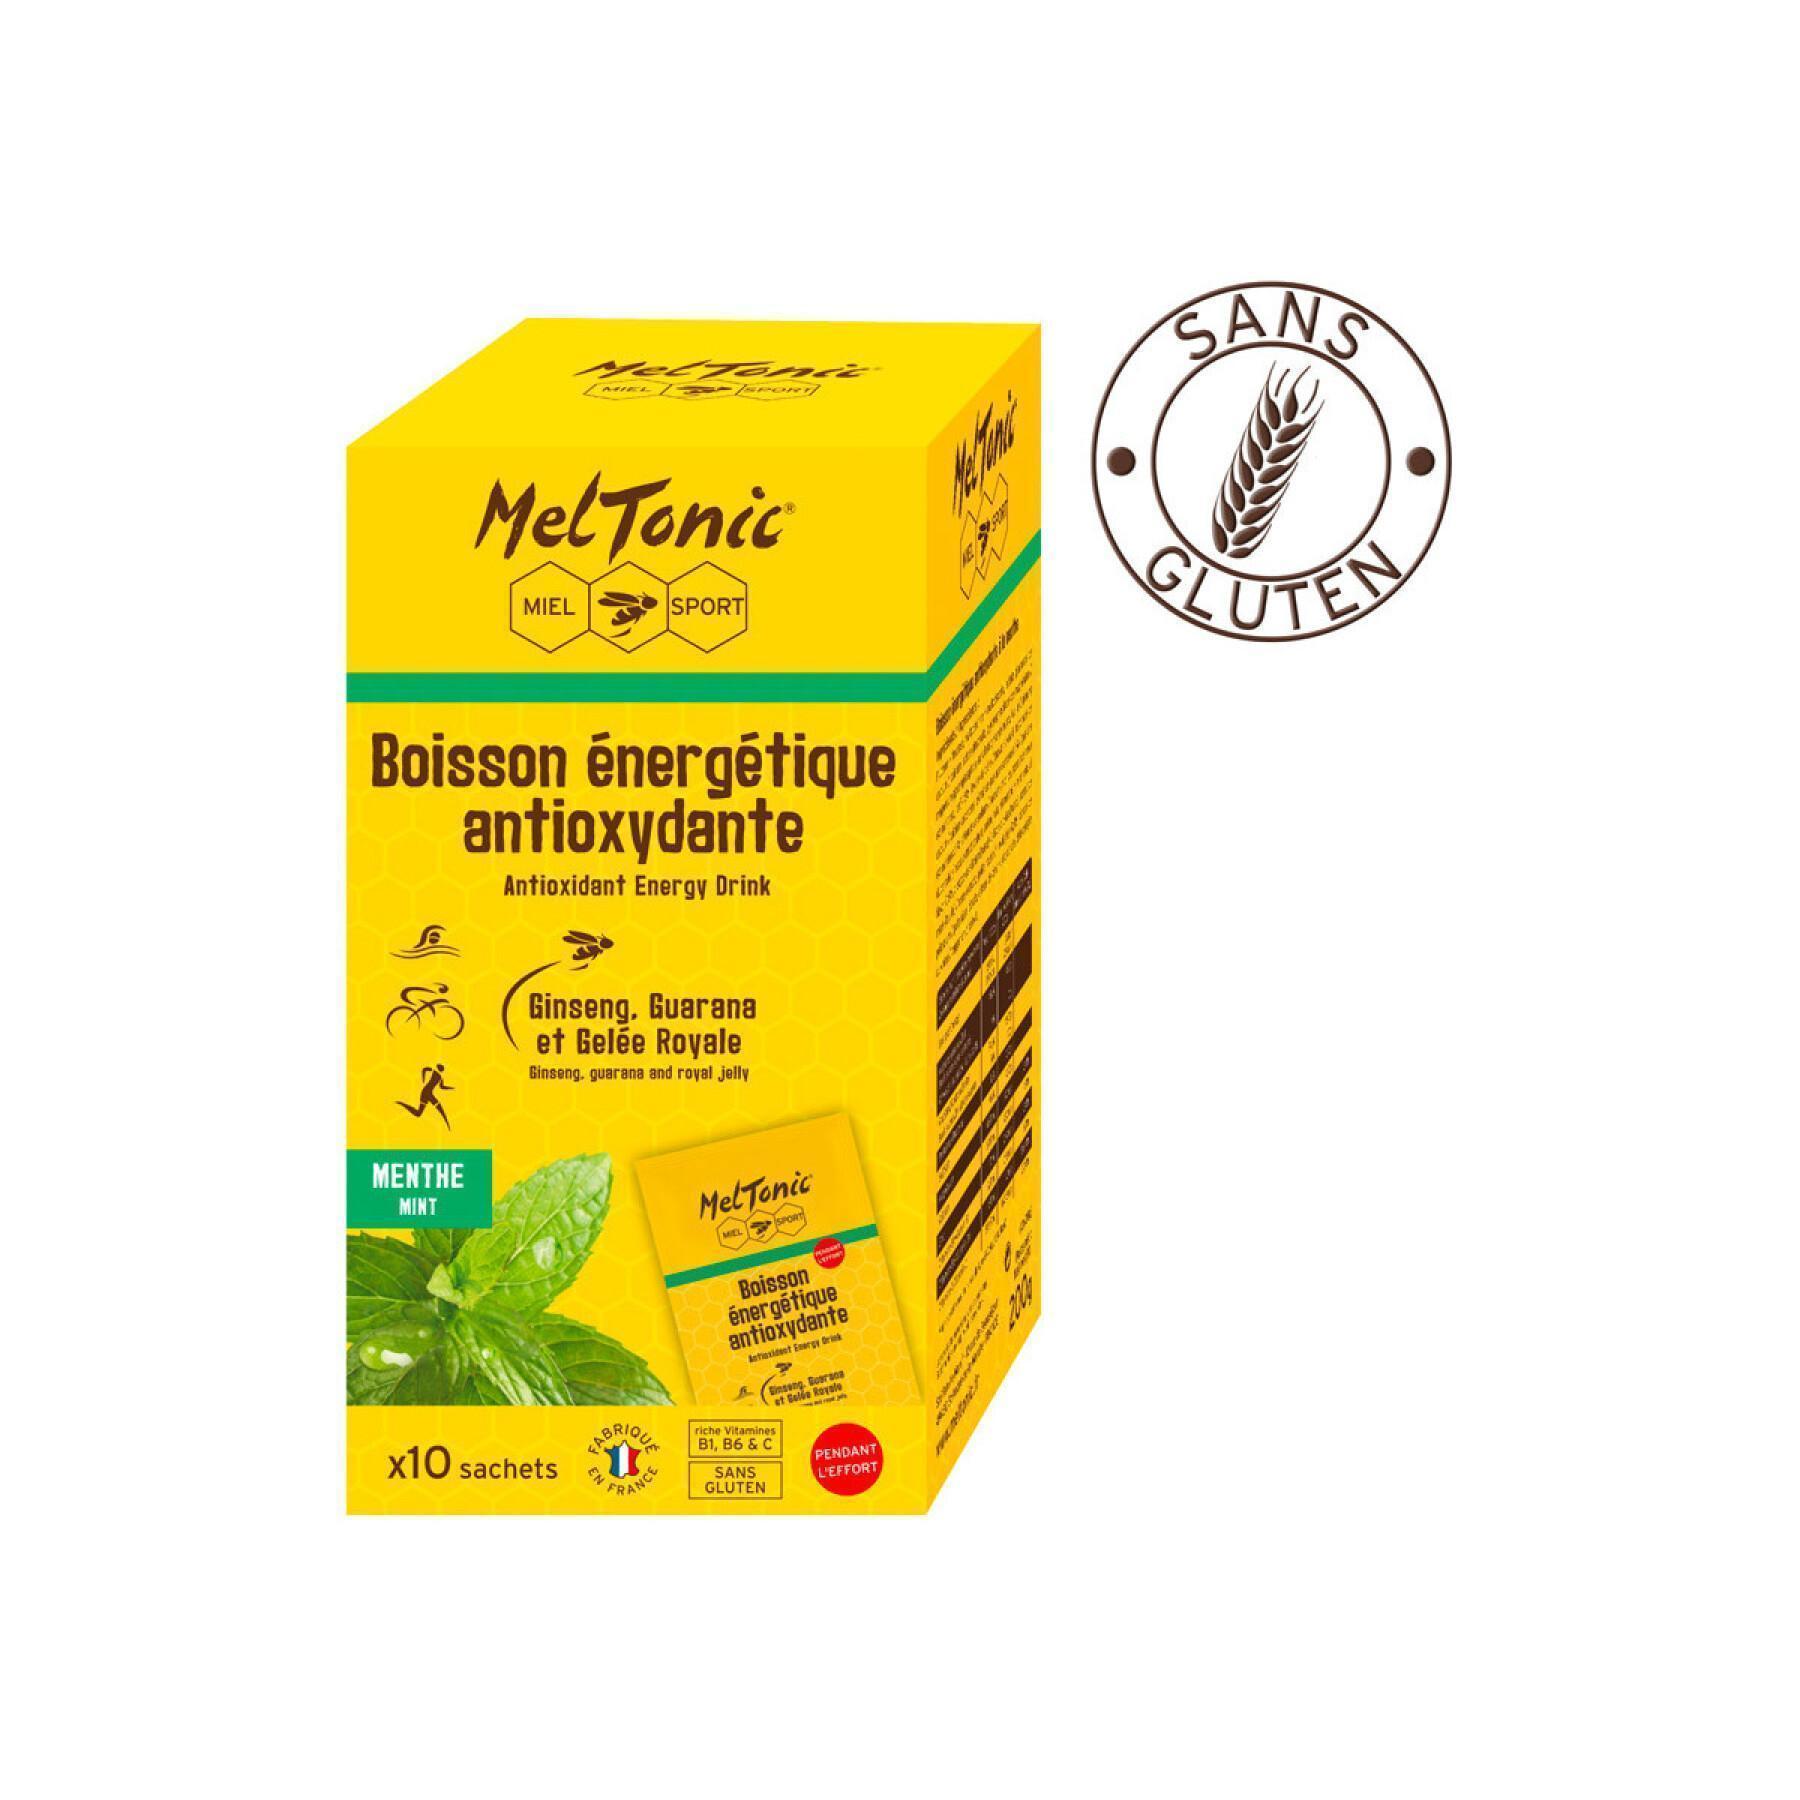 10 packets of antioxidant energy drink Meltonic - Menthe